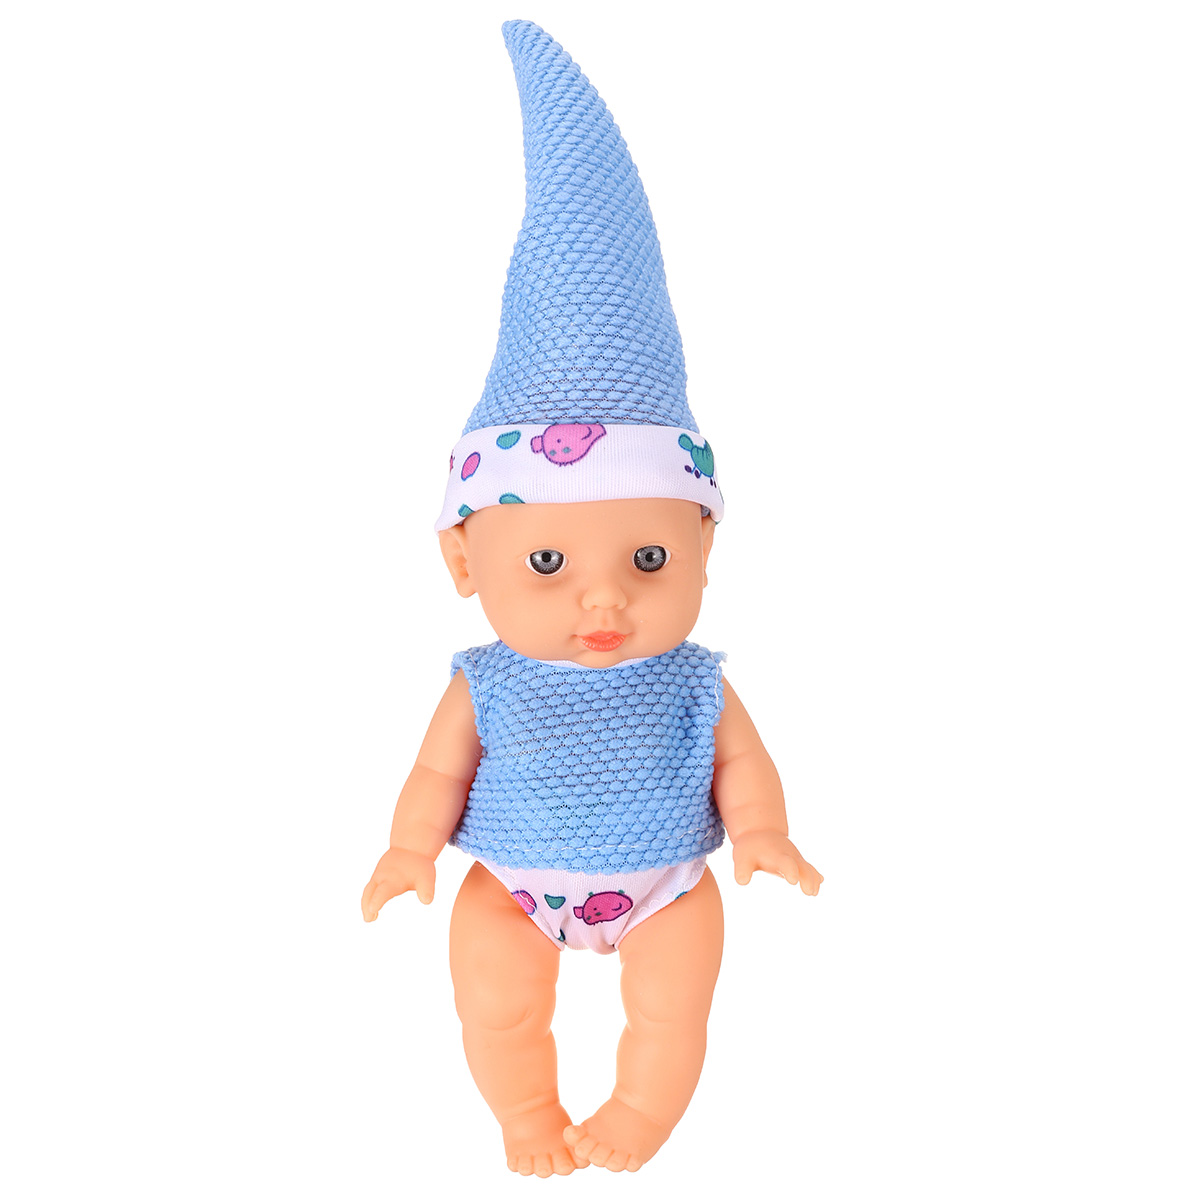 Simulation-Baby-3D-Creative-Cute-Doll-Play-House-Toy-Doll-Vinyl-Doll-Gift-1818655-15